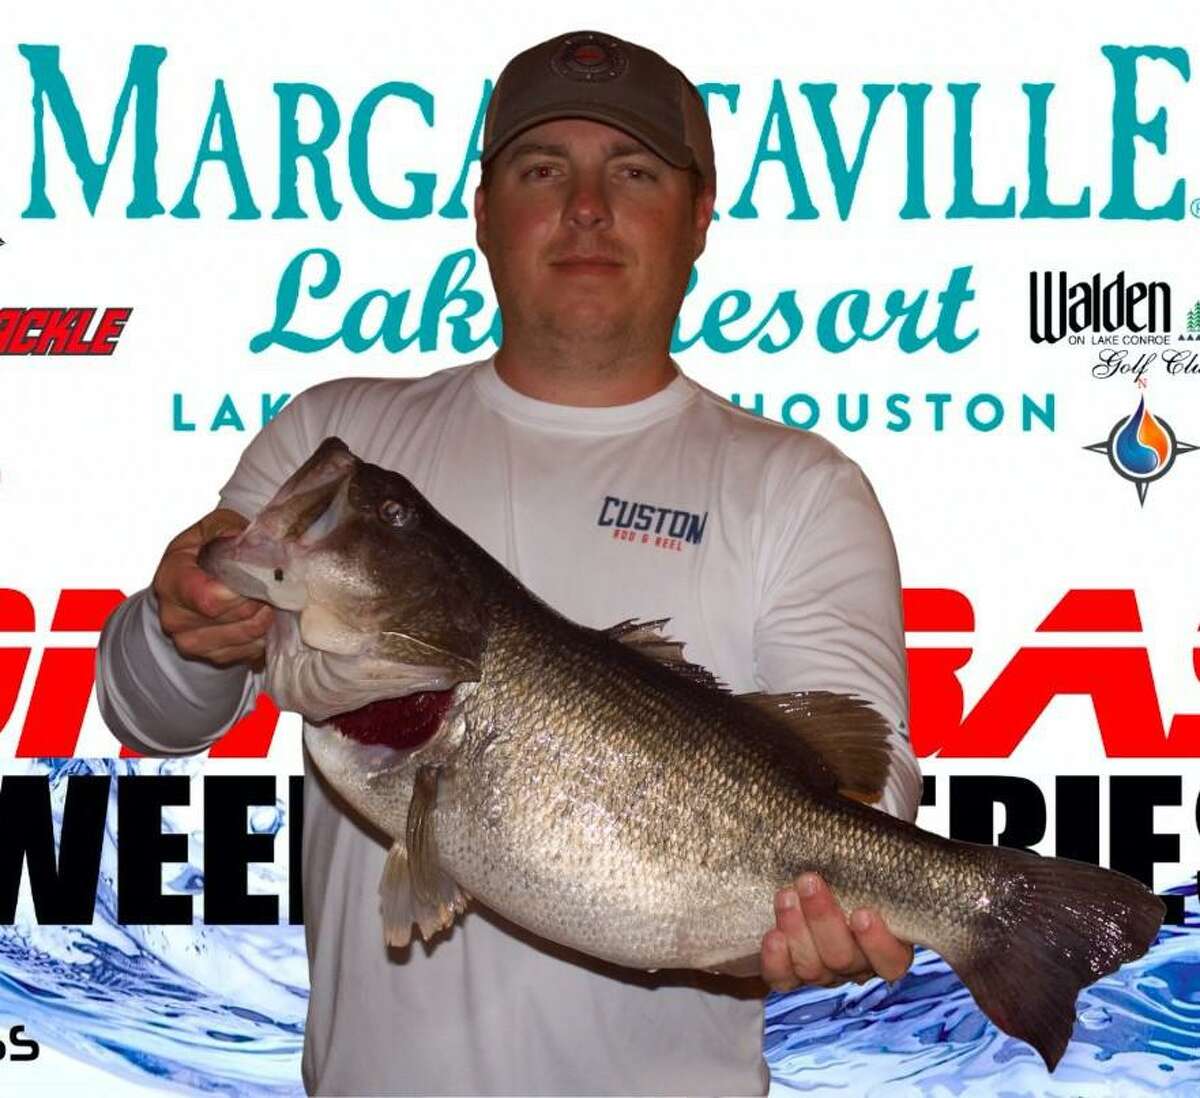 Brian Phipps (pictured) and Preston Wittenburg came in third place in the CONROEBASS Tuesday Tournament with a total weight of 10.76 pounds.